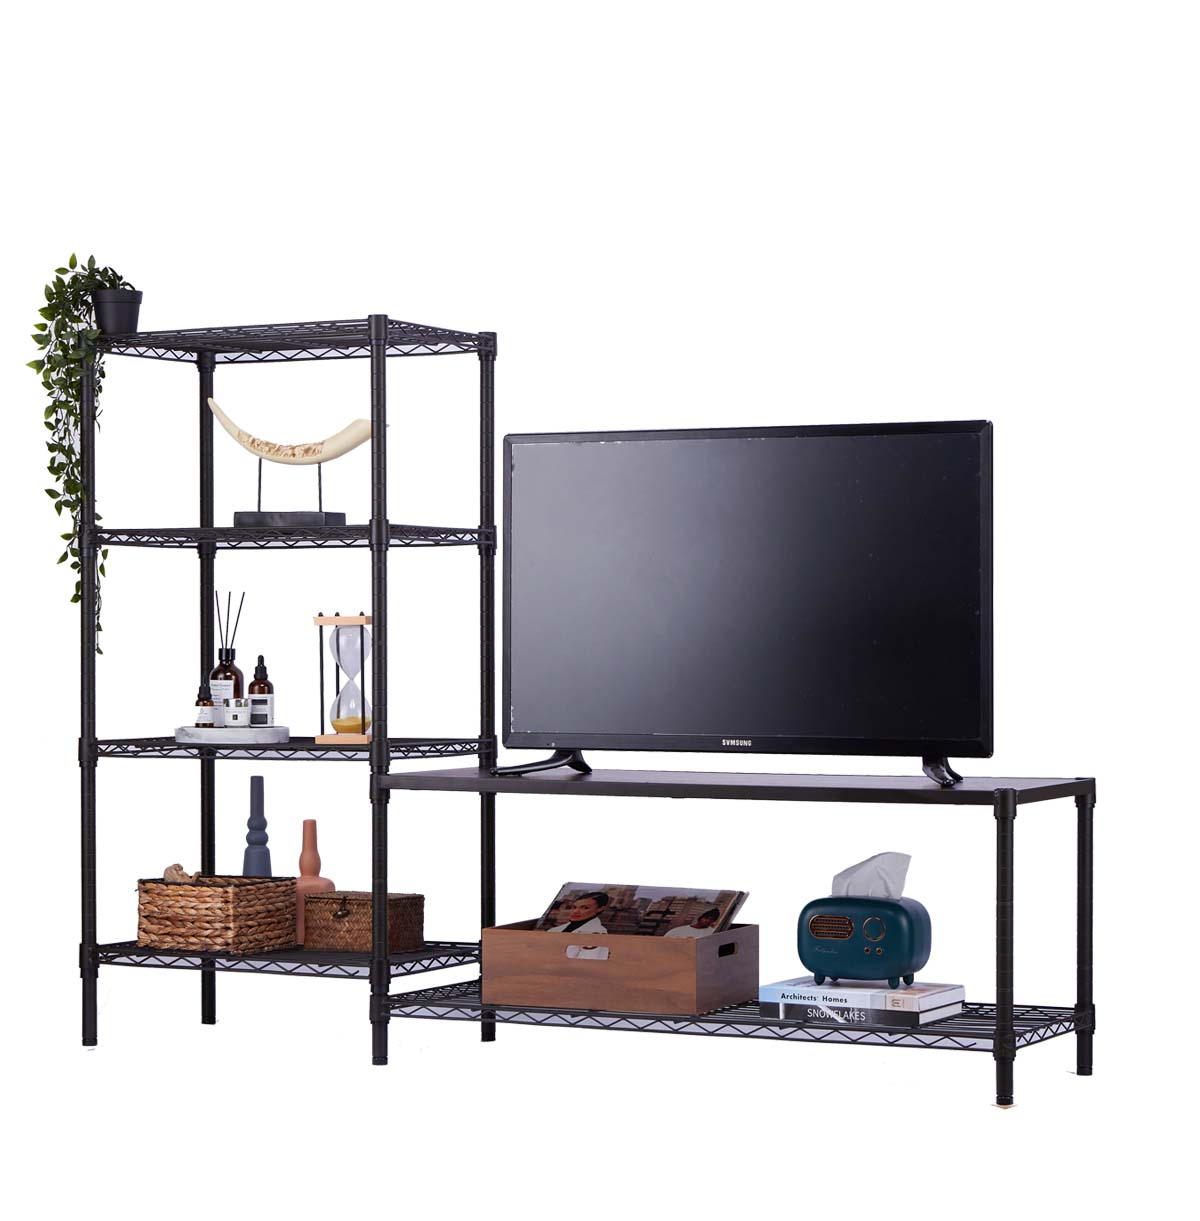 6-Tier Metal TV Stand For 42 Inch TV/ Entertainment Center / TV Console Table With Open Storage Shel